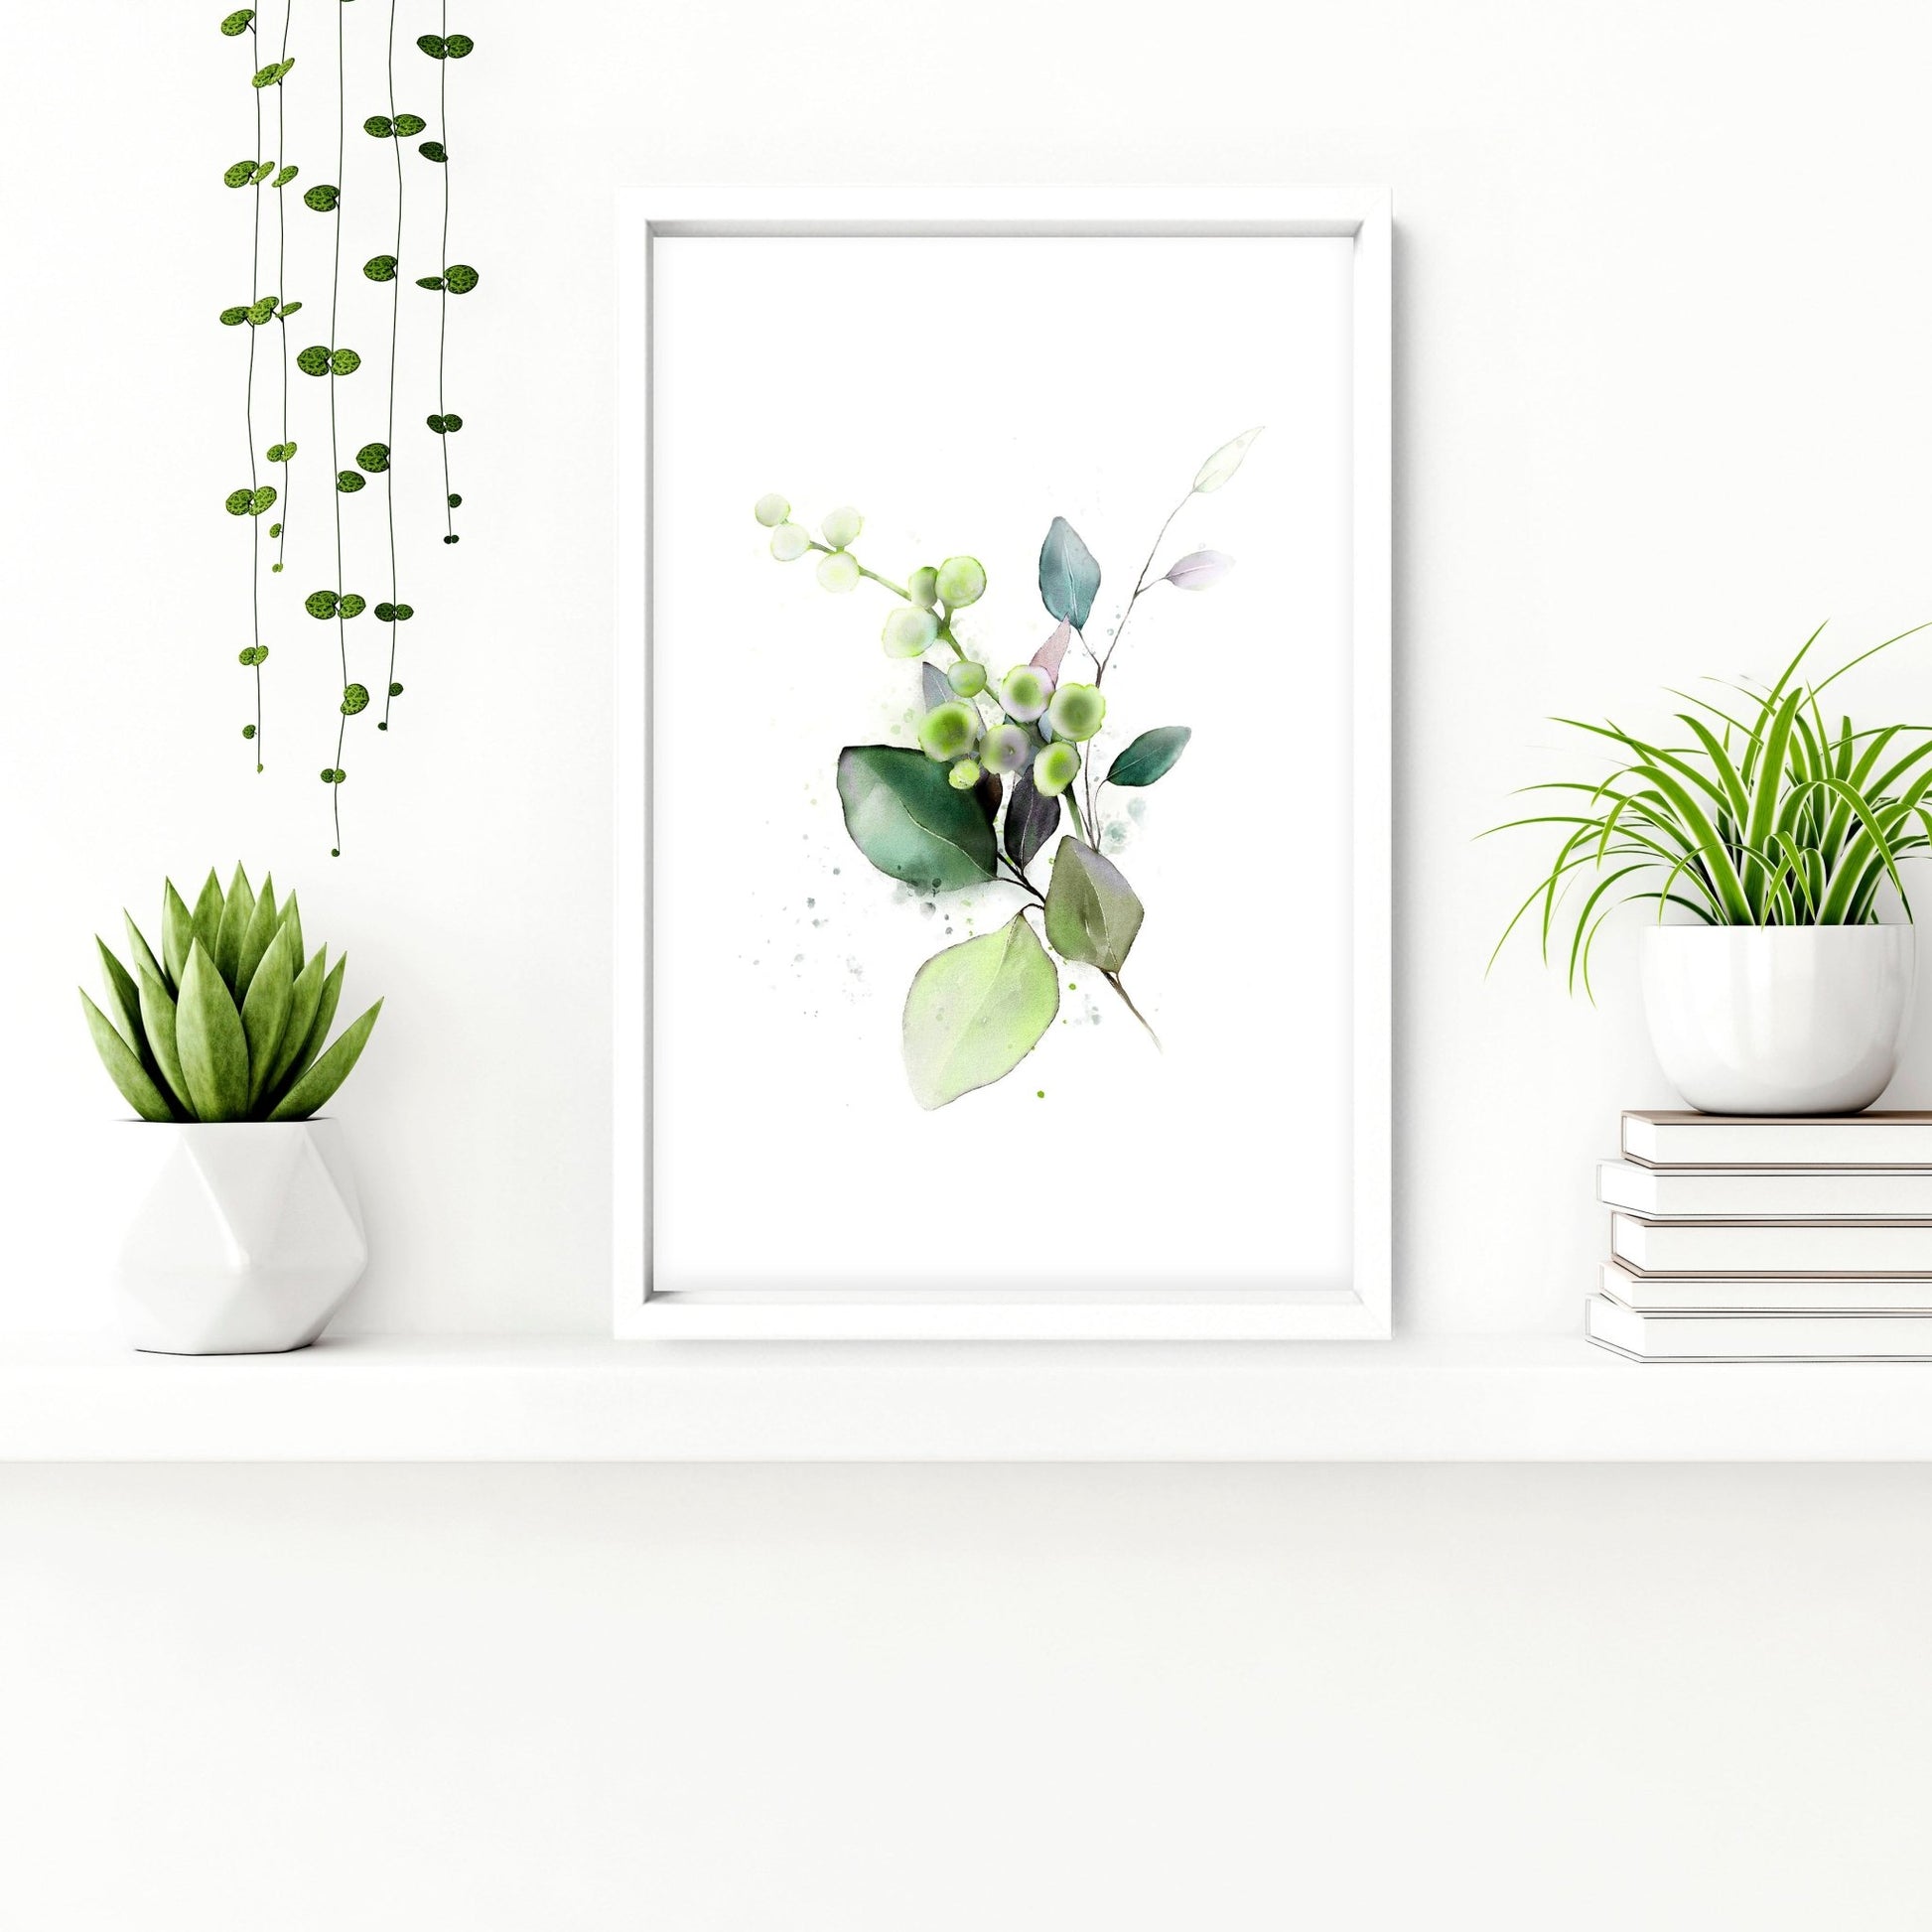 Wall decor for bathroom | Set of 3 art prints - About Wall Art